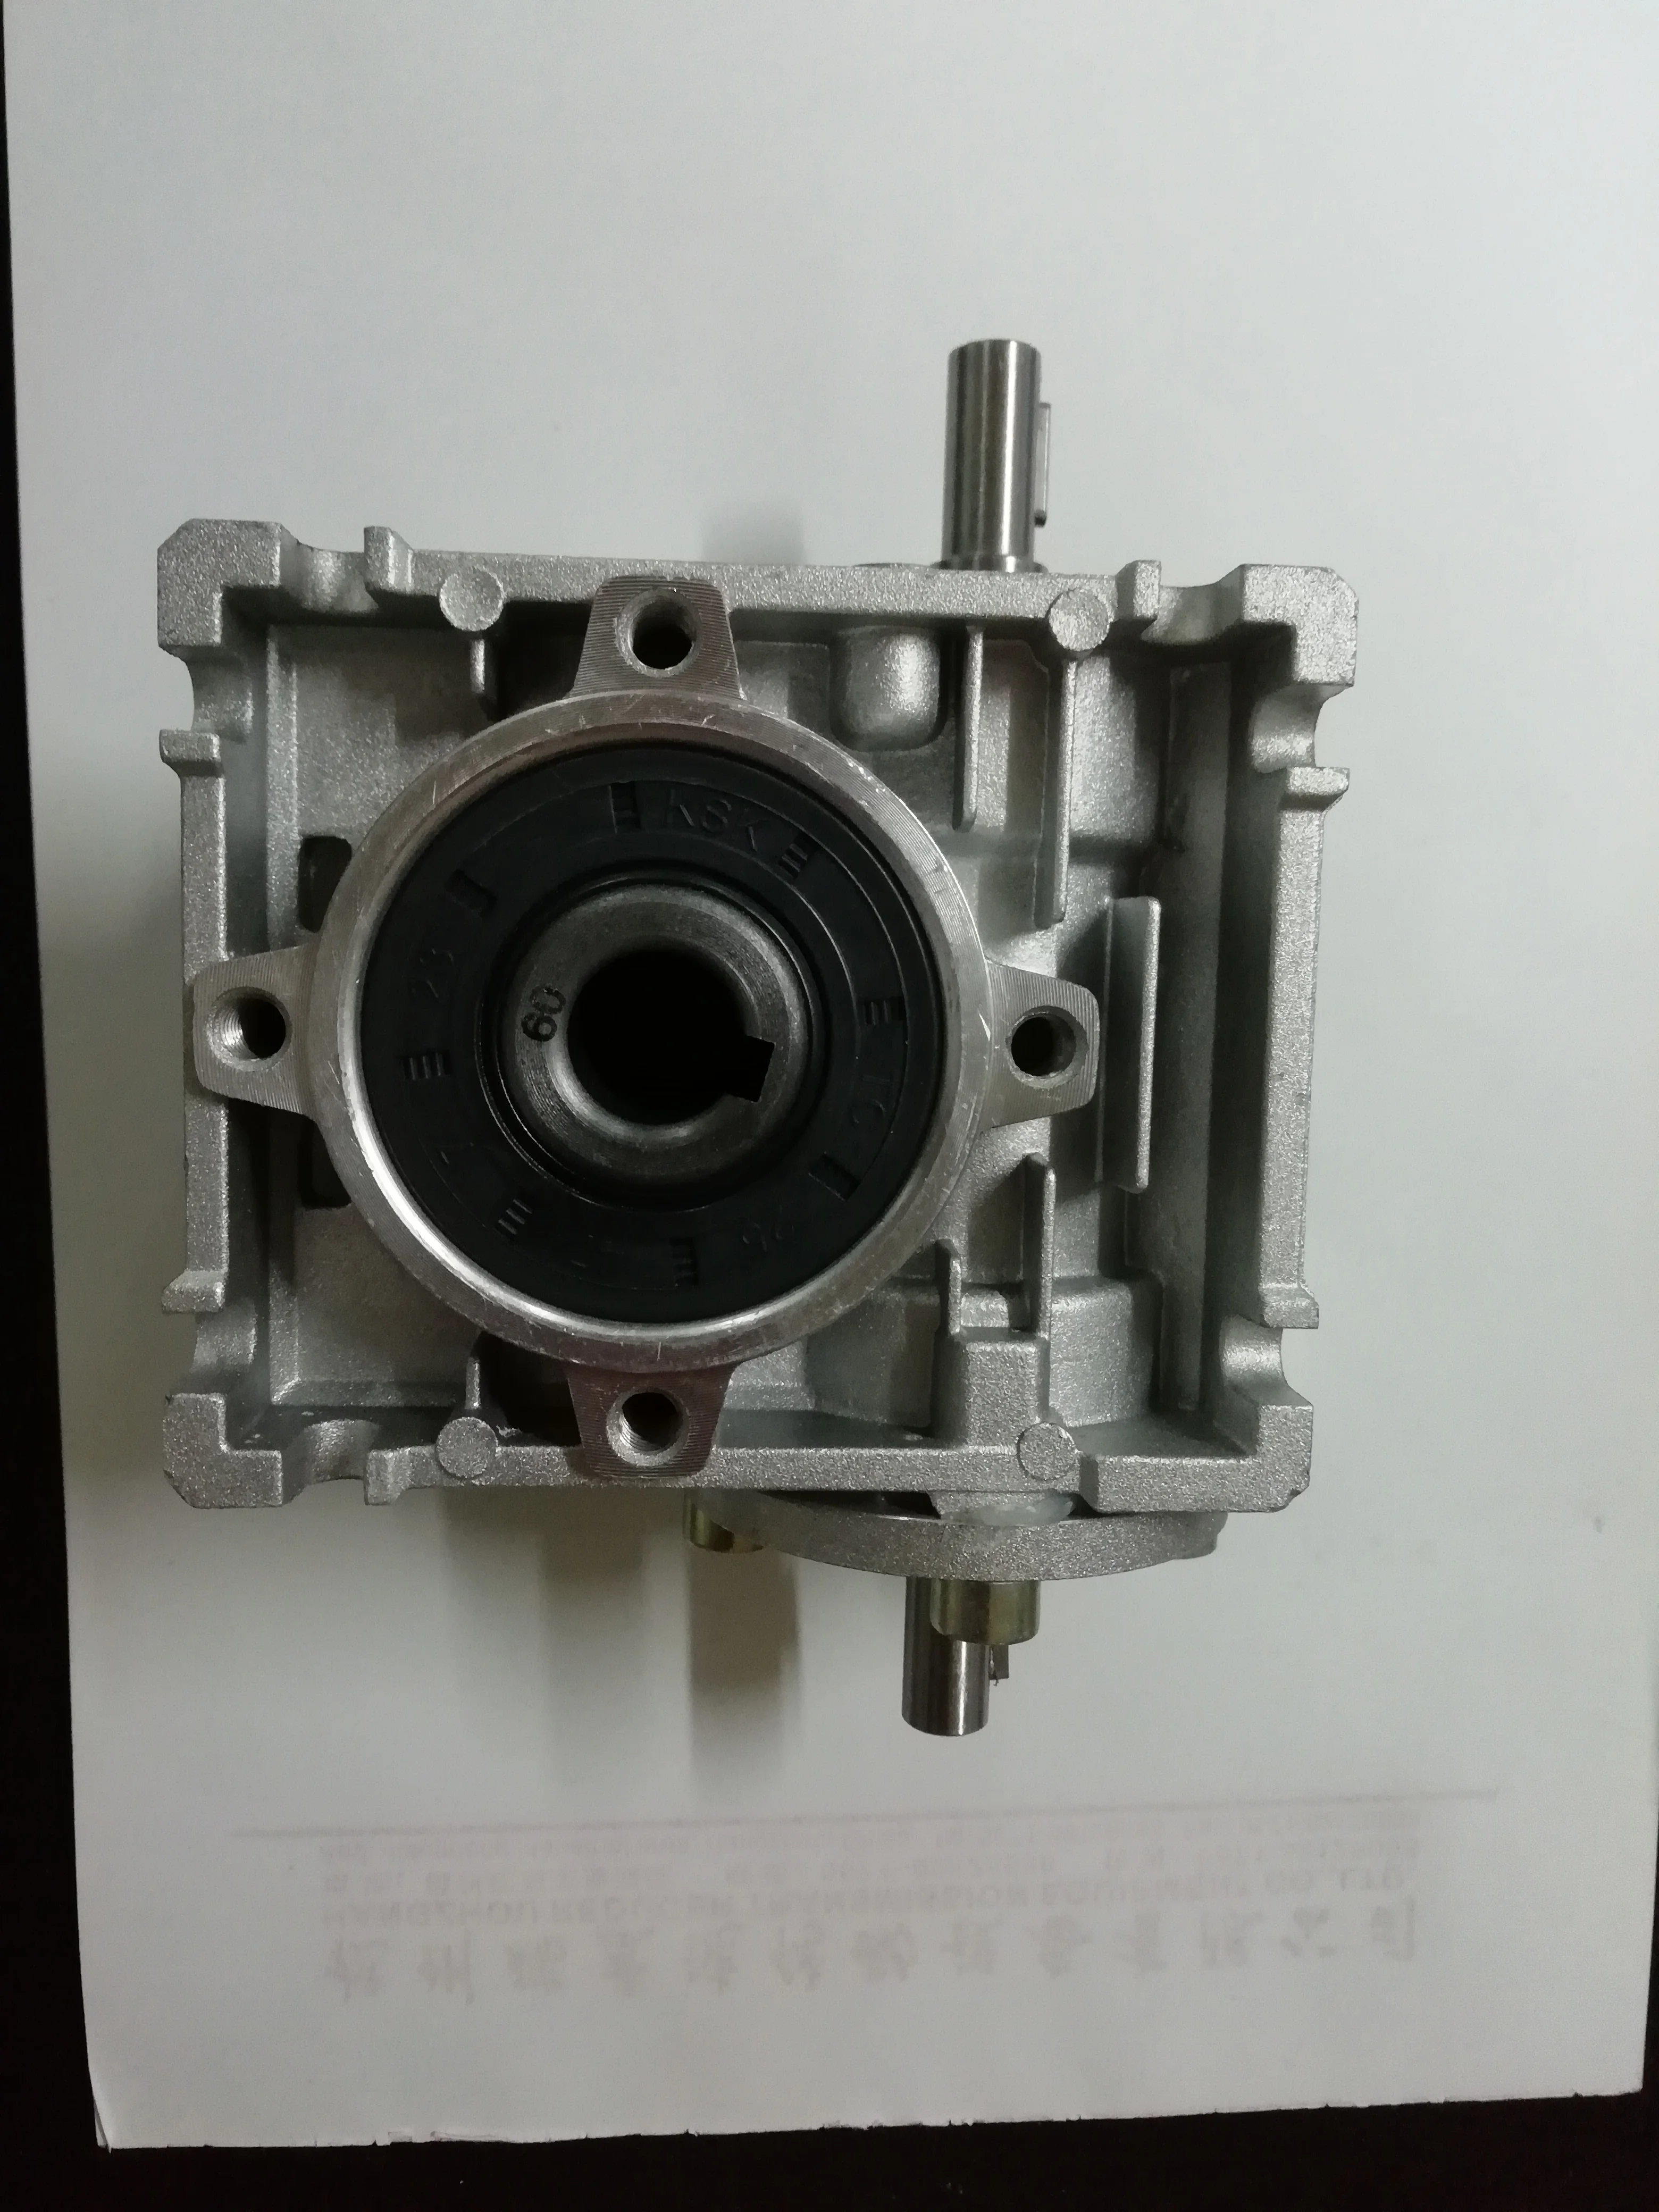 Fevas NRV063-VS Worm Reducer Double Extension Shaft 19mm Ratio,5:1-100 1 90 Degree Worm Gearbox Speed Reducer 